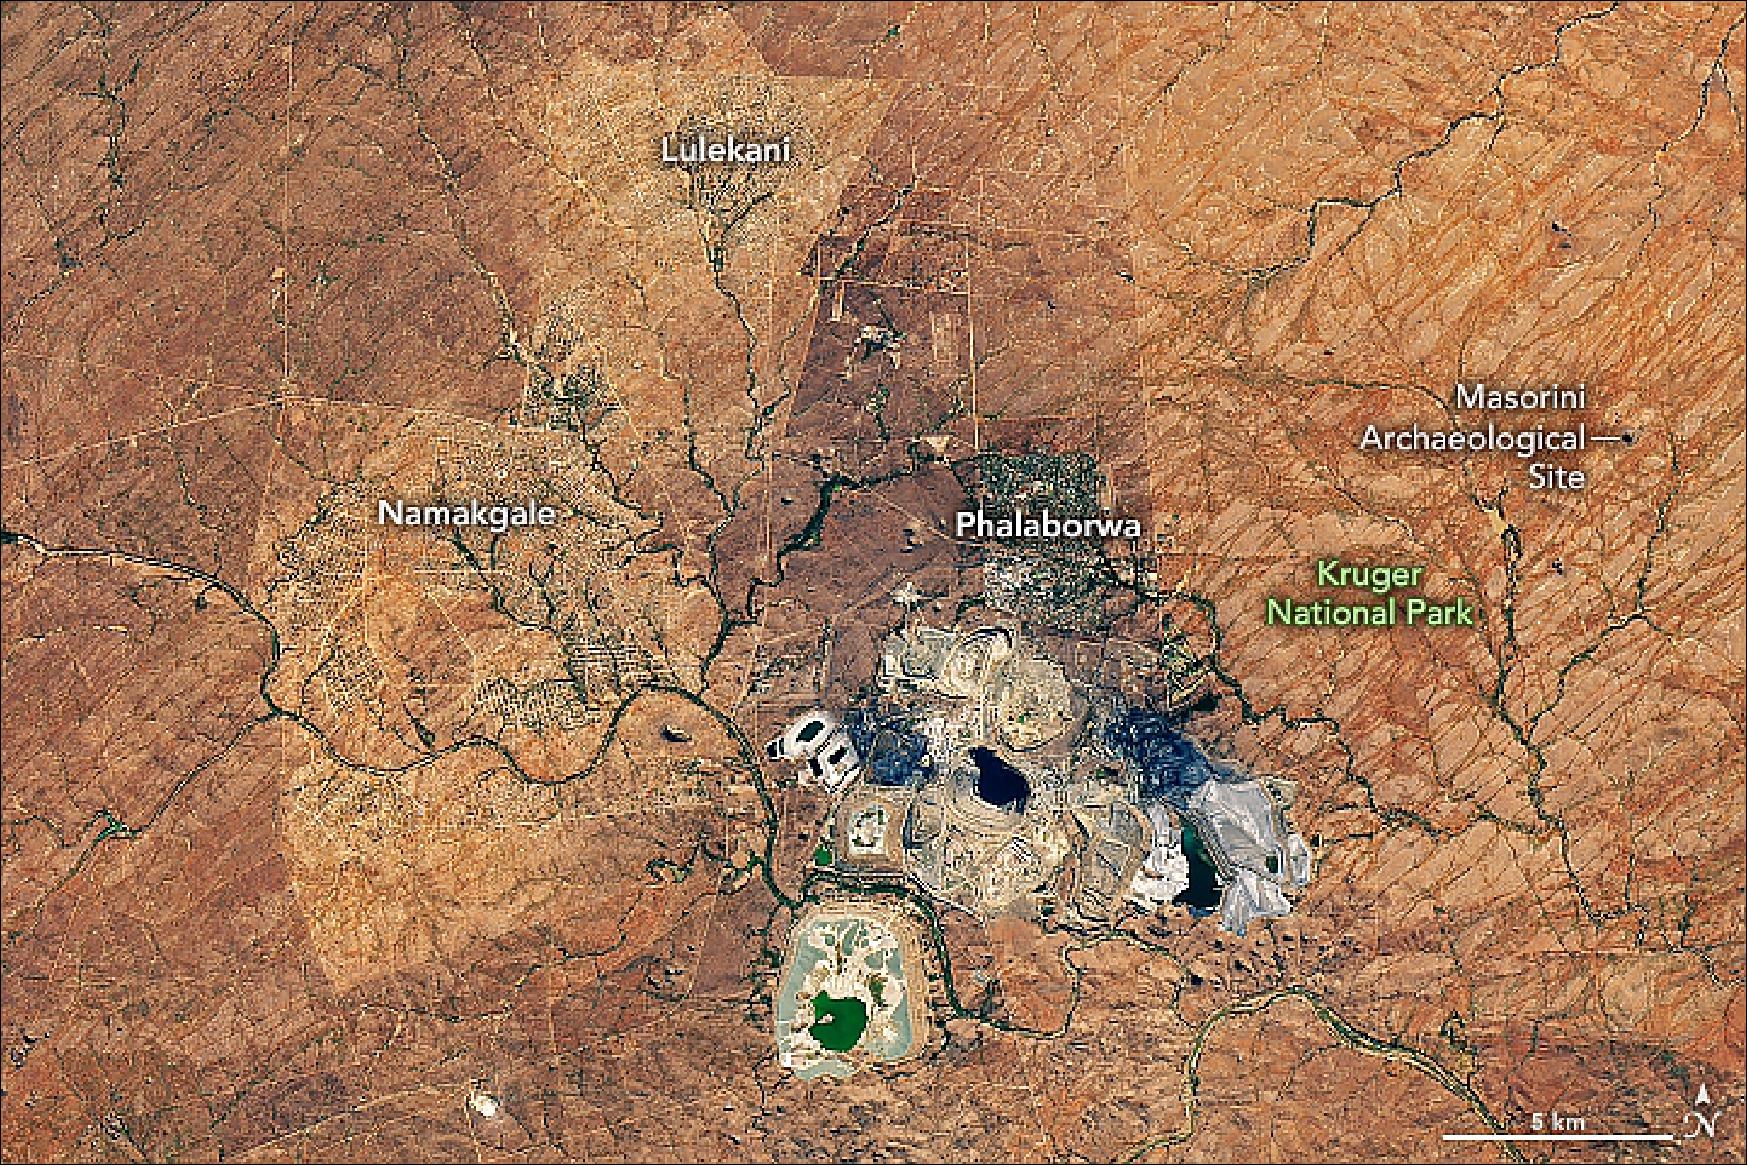 Figure 59: The pit near Phalaborwa and Kruger National Park is the most visible sign of a long history of mining in the region. The mine pictured here has been growing vertically and horizontally near Phalaborwa, South Africa, for more than 50 years. The Operational Land Imager (OLI) on Landsat 8 acquired this image of the Palabora mine on July 2, 2019. It is South Africa’s largest open-pit mine, measuring almost 2 km wide. It is about half the width of the world’s largest open-pit mine, which is at Bingham Canyon in Utah (image credit: NASA Earth Observatory image by Joshua Stevens and Allison Nussbaum, using Landsat data from the U.S. Geological Survey and topographic data from the Shuttle Radar Topography Mission (SRTM). Story by Kathryn Hansen)